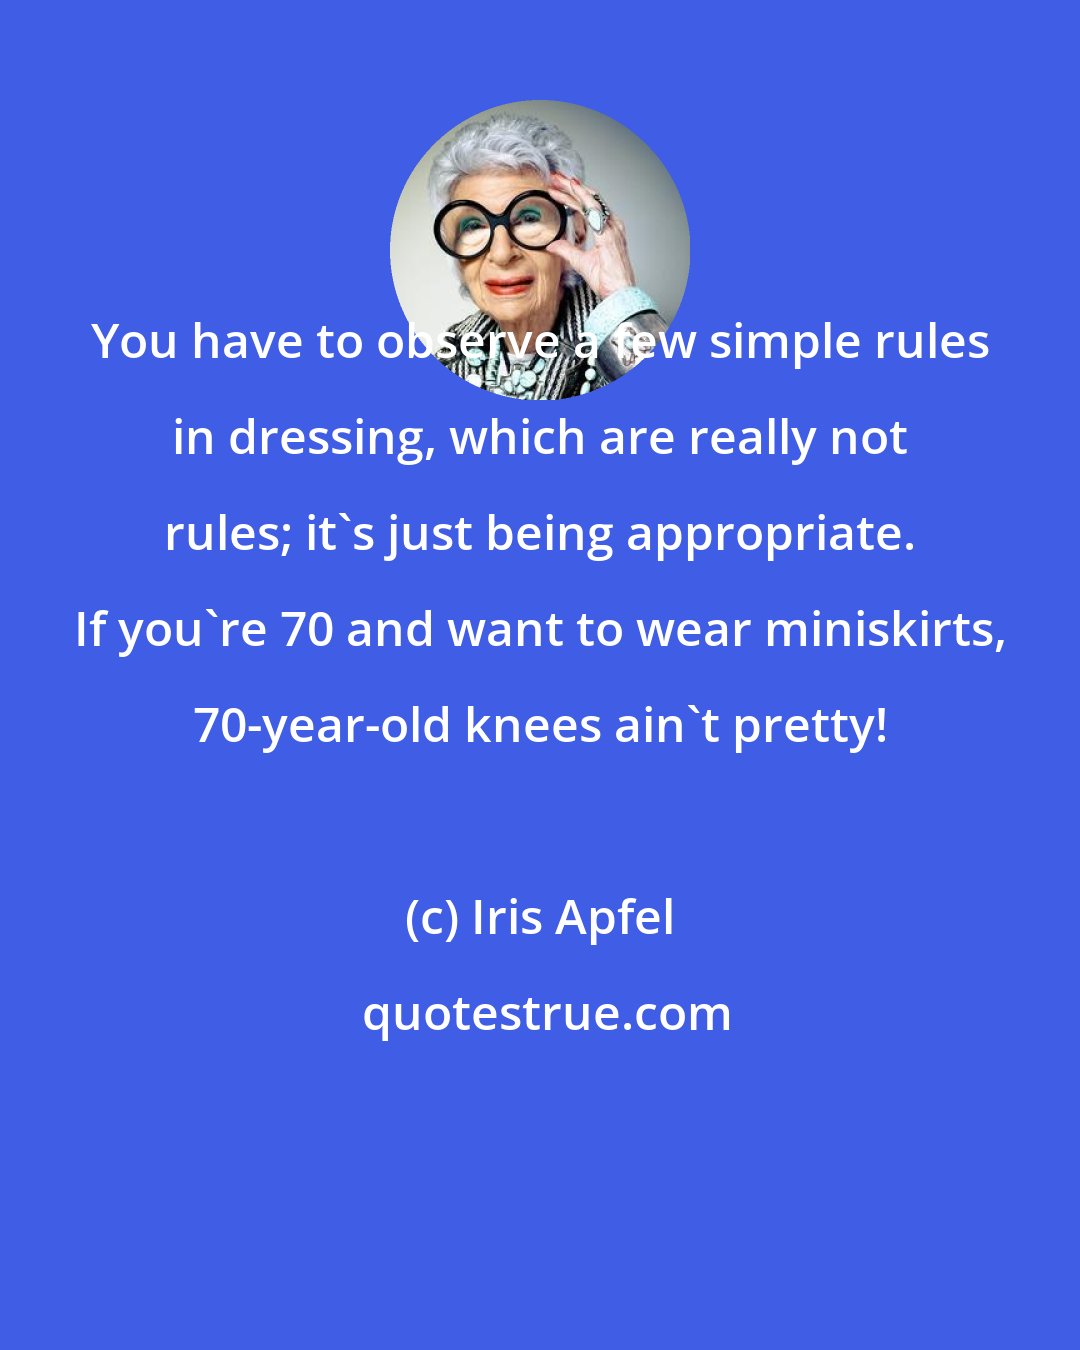 Iris Apfel: You have to observe a few simple rules in dressing, which are really not rules; it's just being appropriate. If you're 70 and want to wear miniskirts, 70-year-old knees ain't pretty!